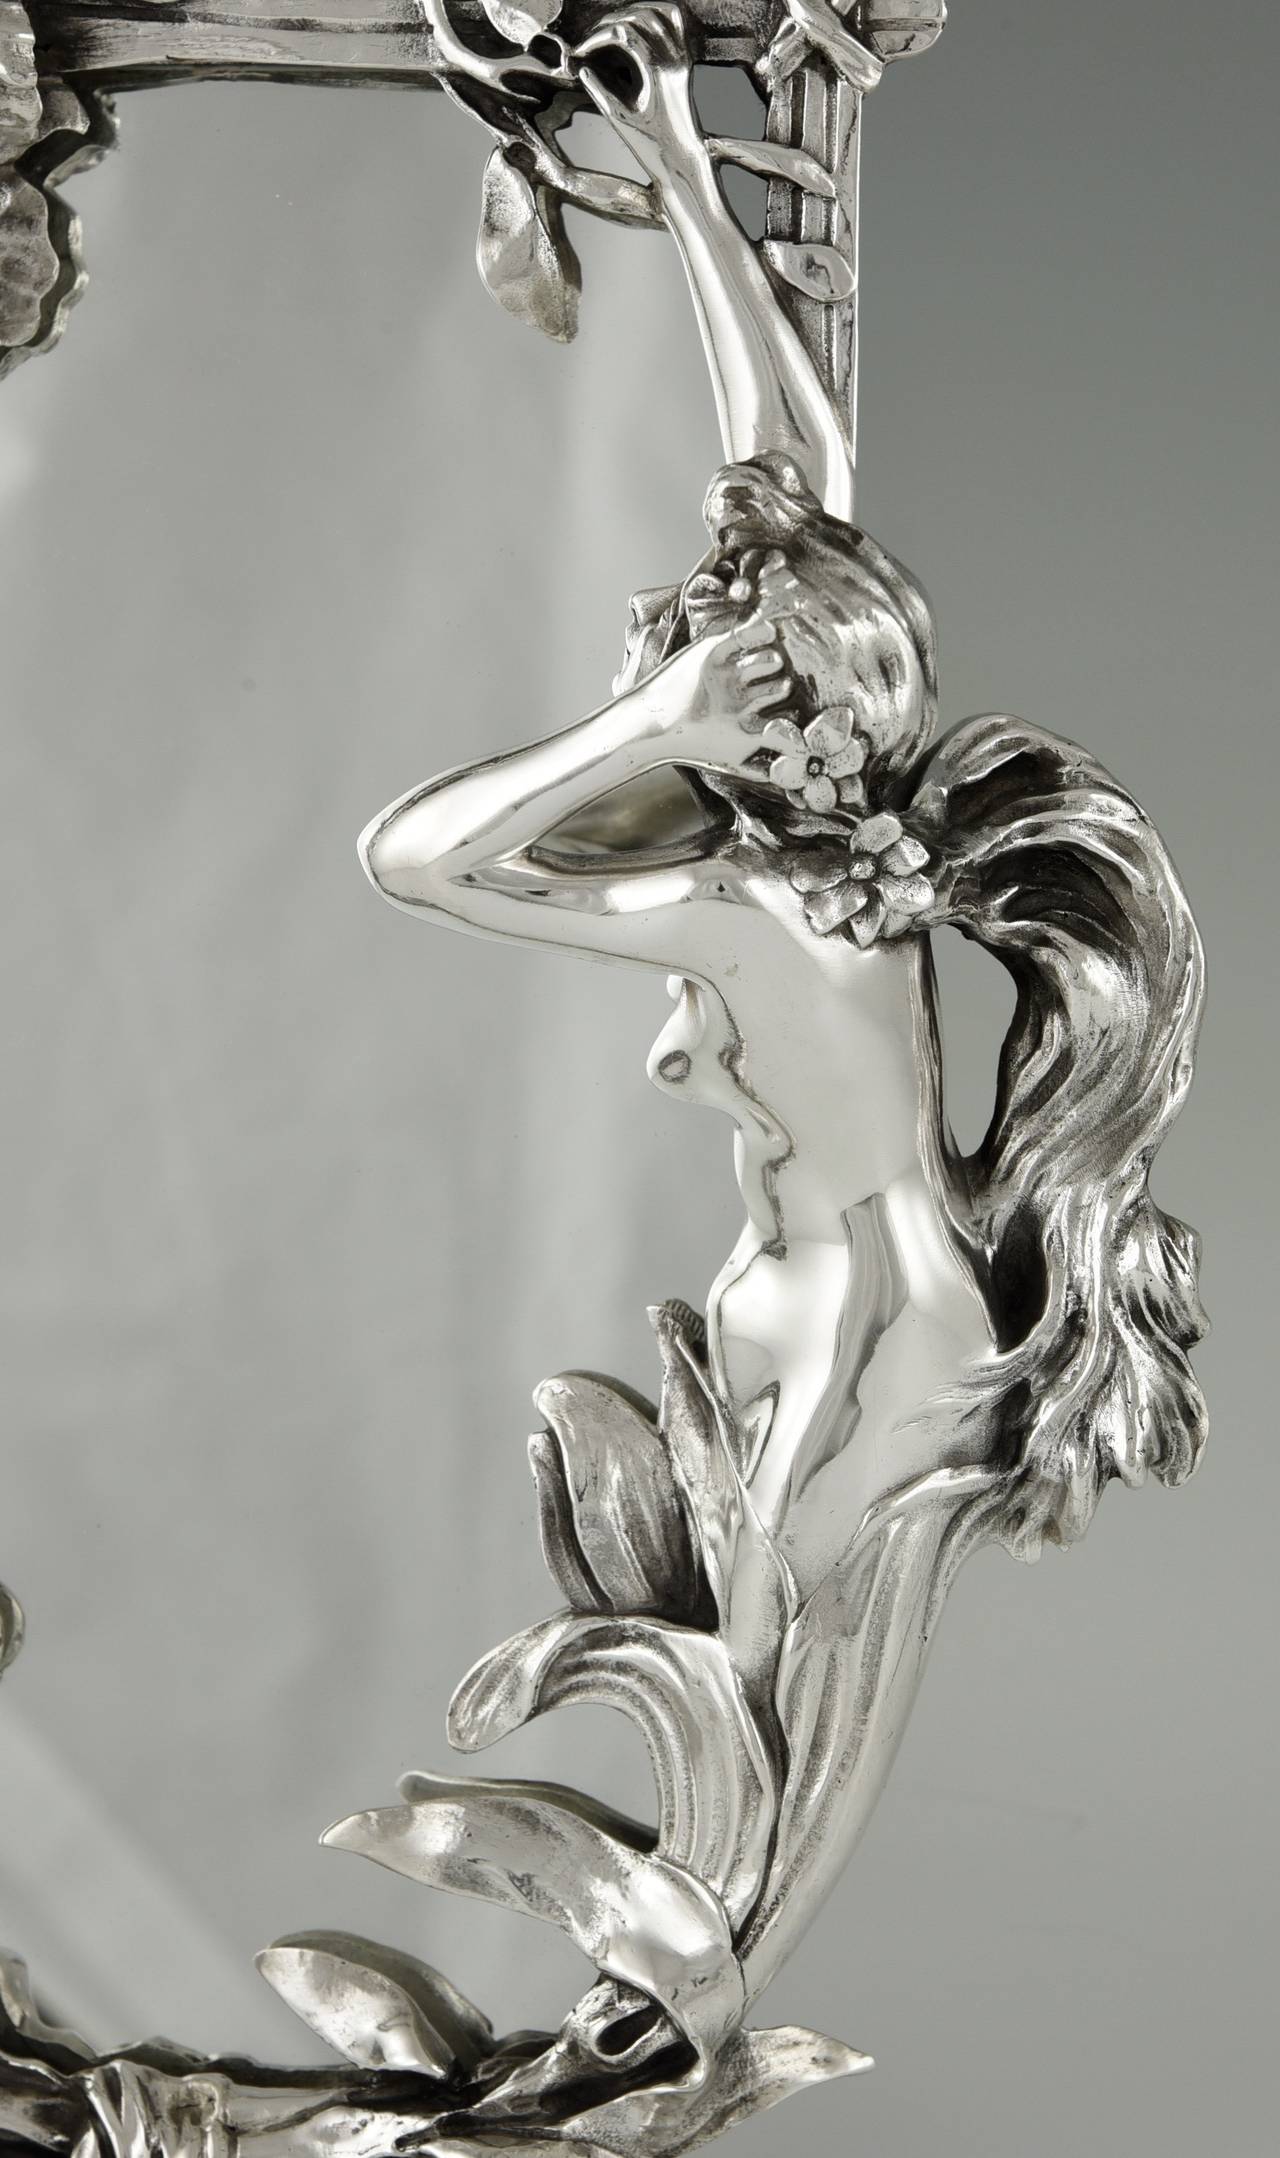 Early 20th Century French Art Nouveau Silvered Table Mirror with Nude by Peyre, 1900